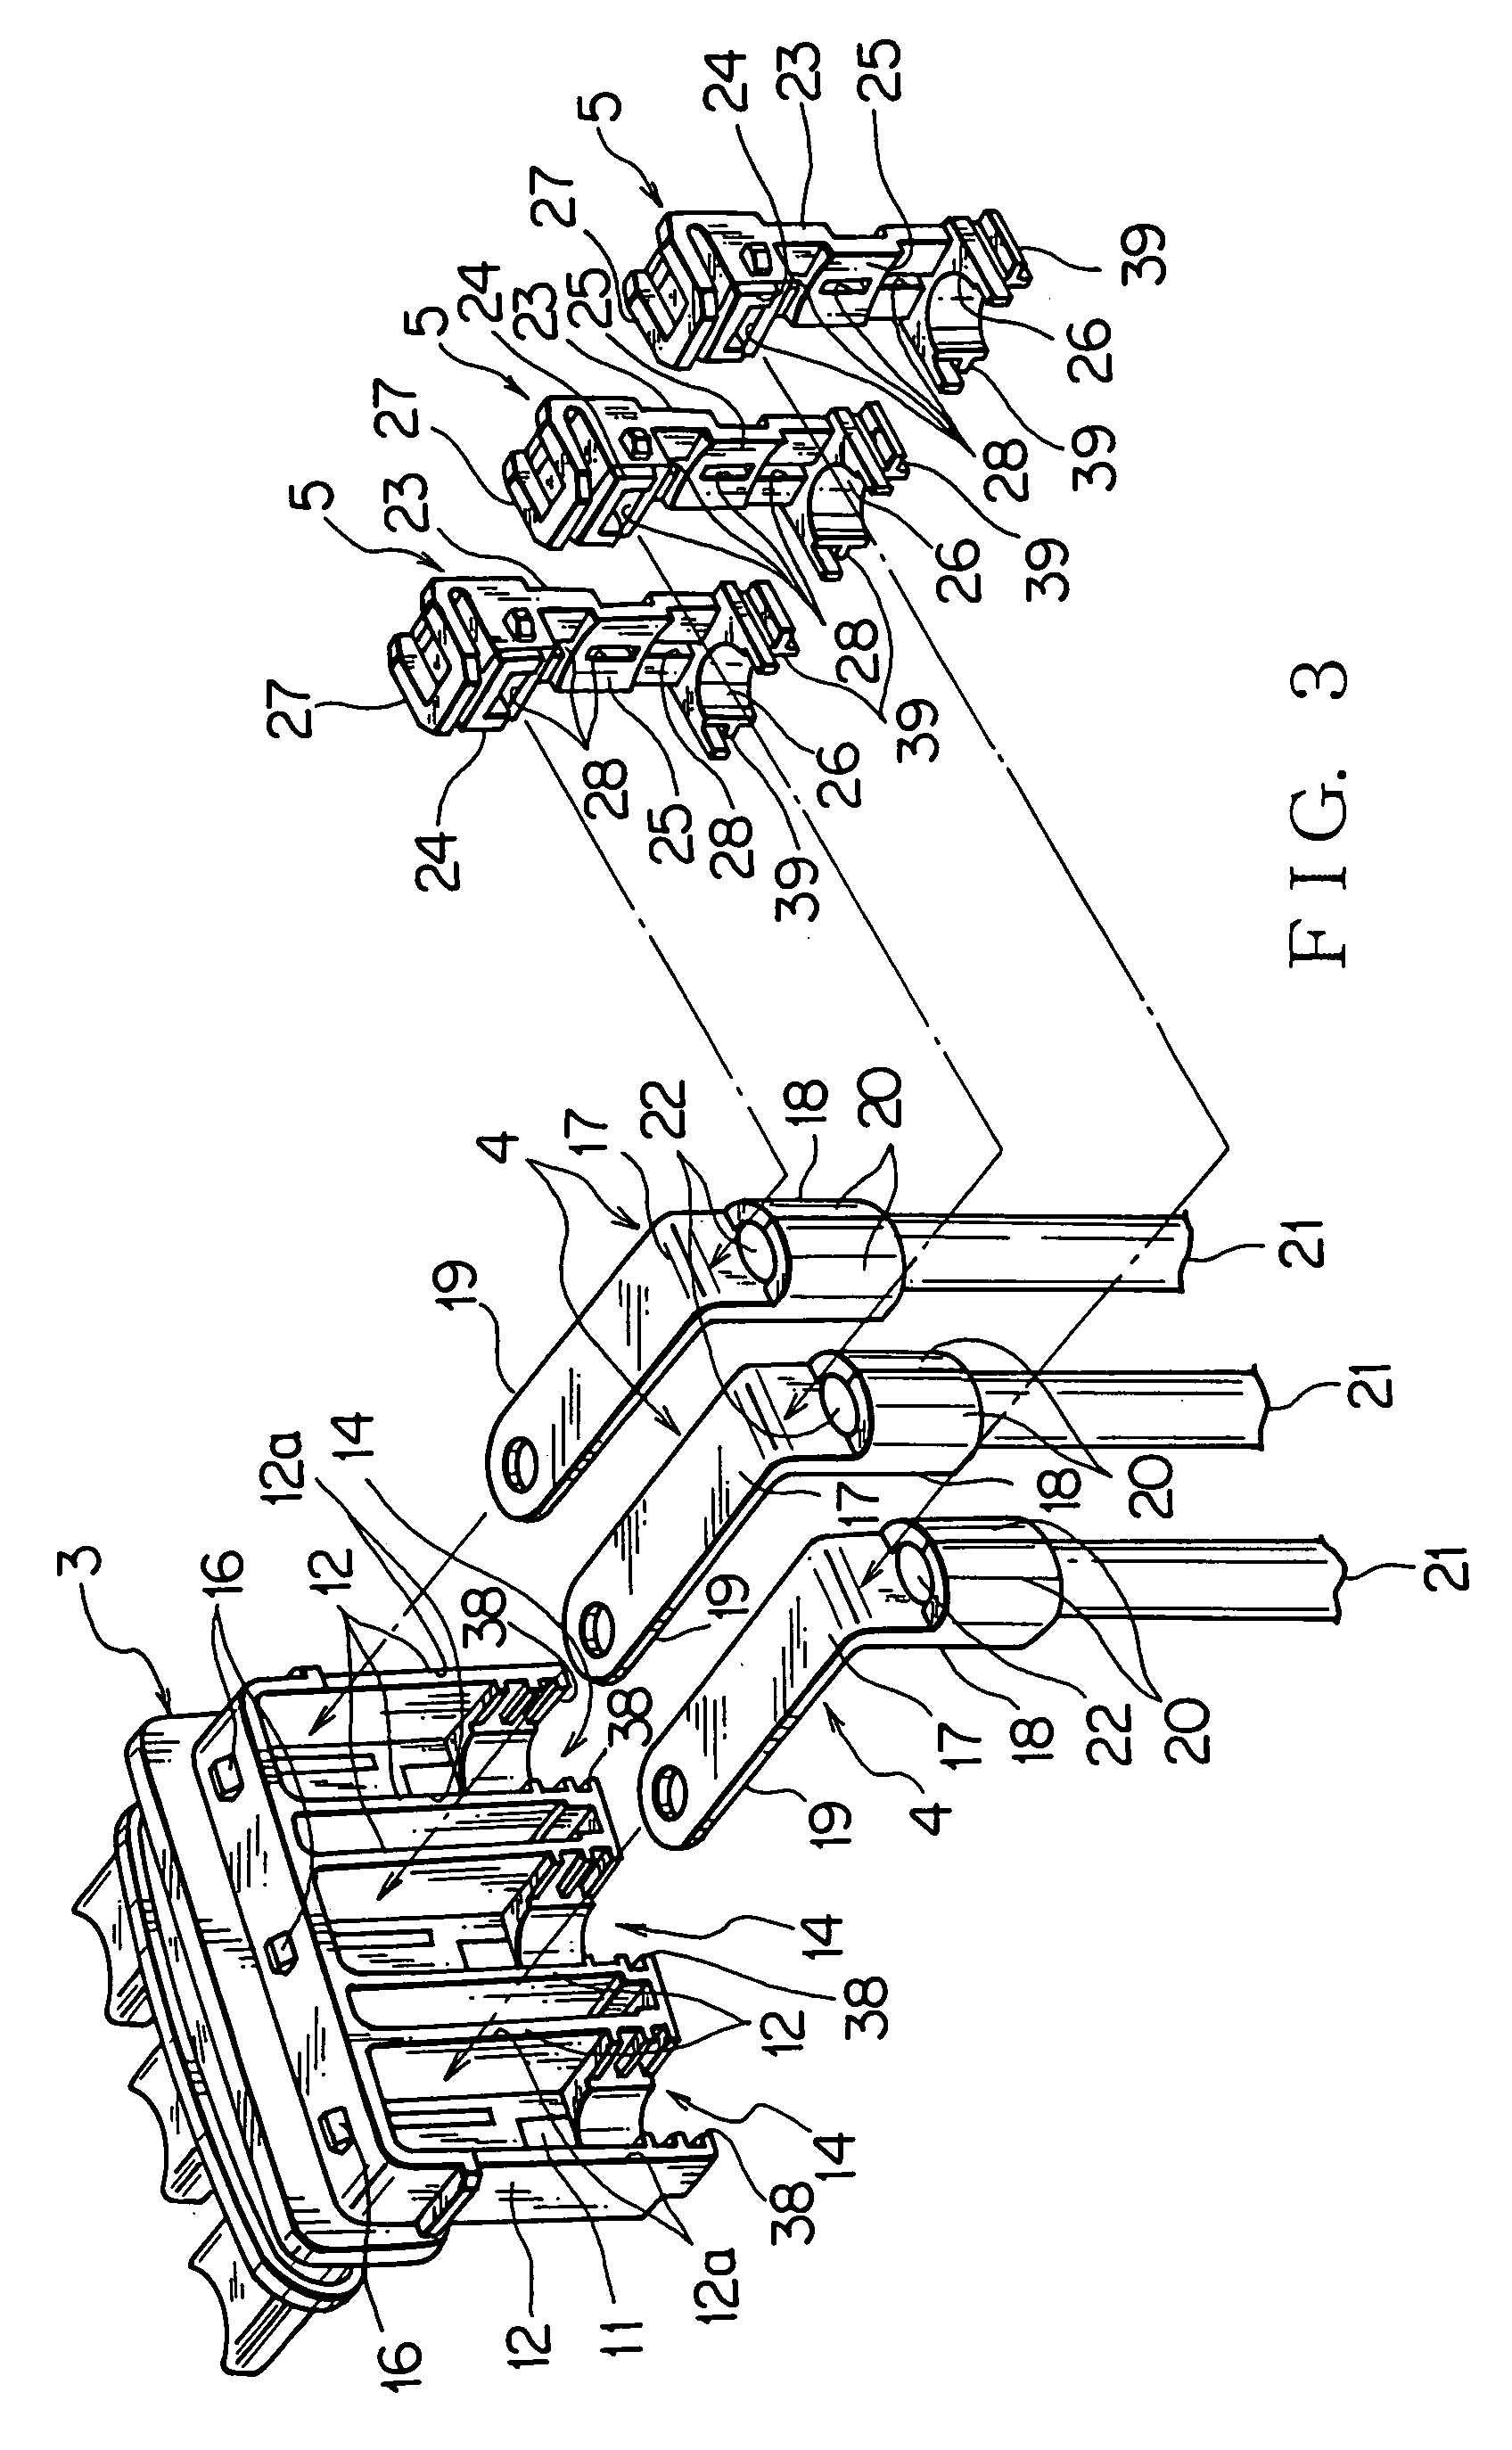 Electrical connector and terminal holder